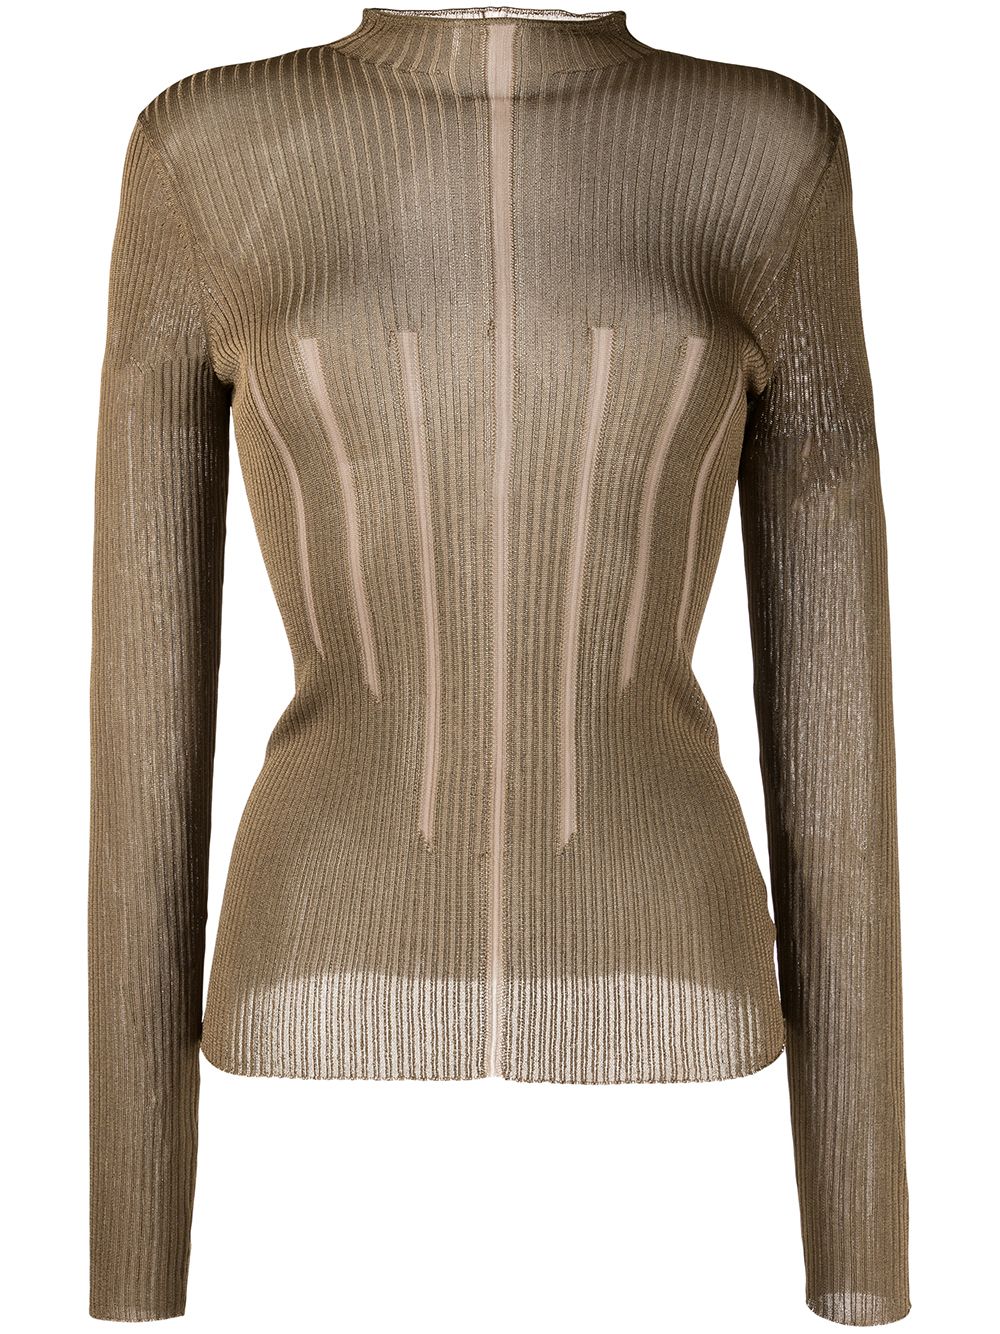 Dion Lee cut out-detail knitted top - Green